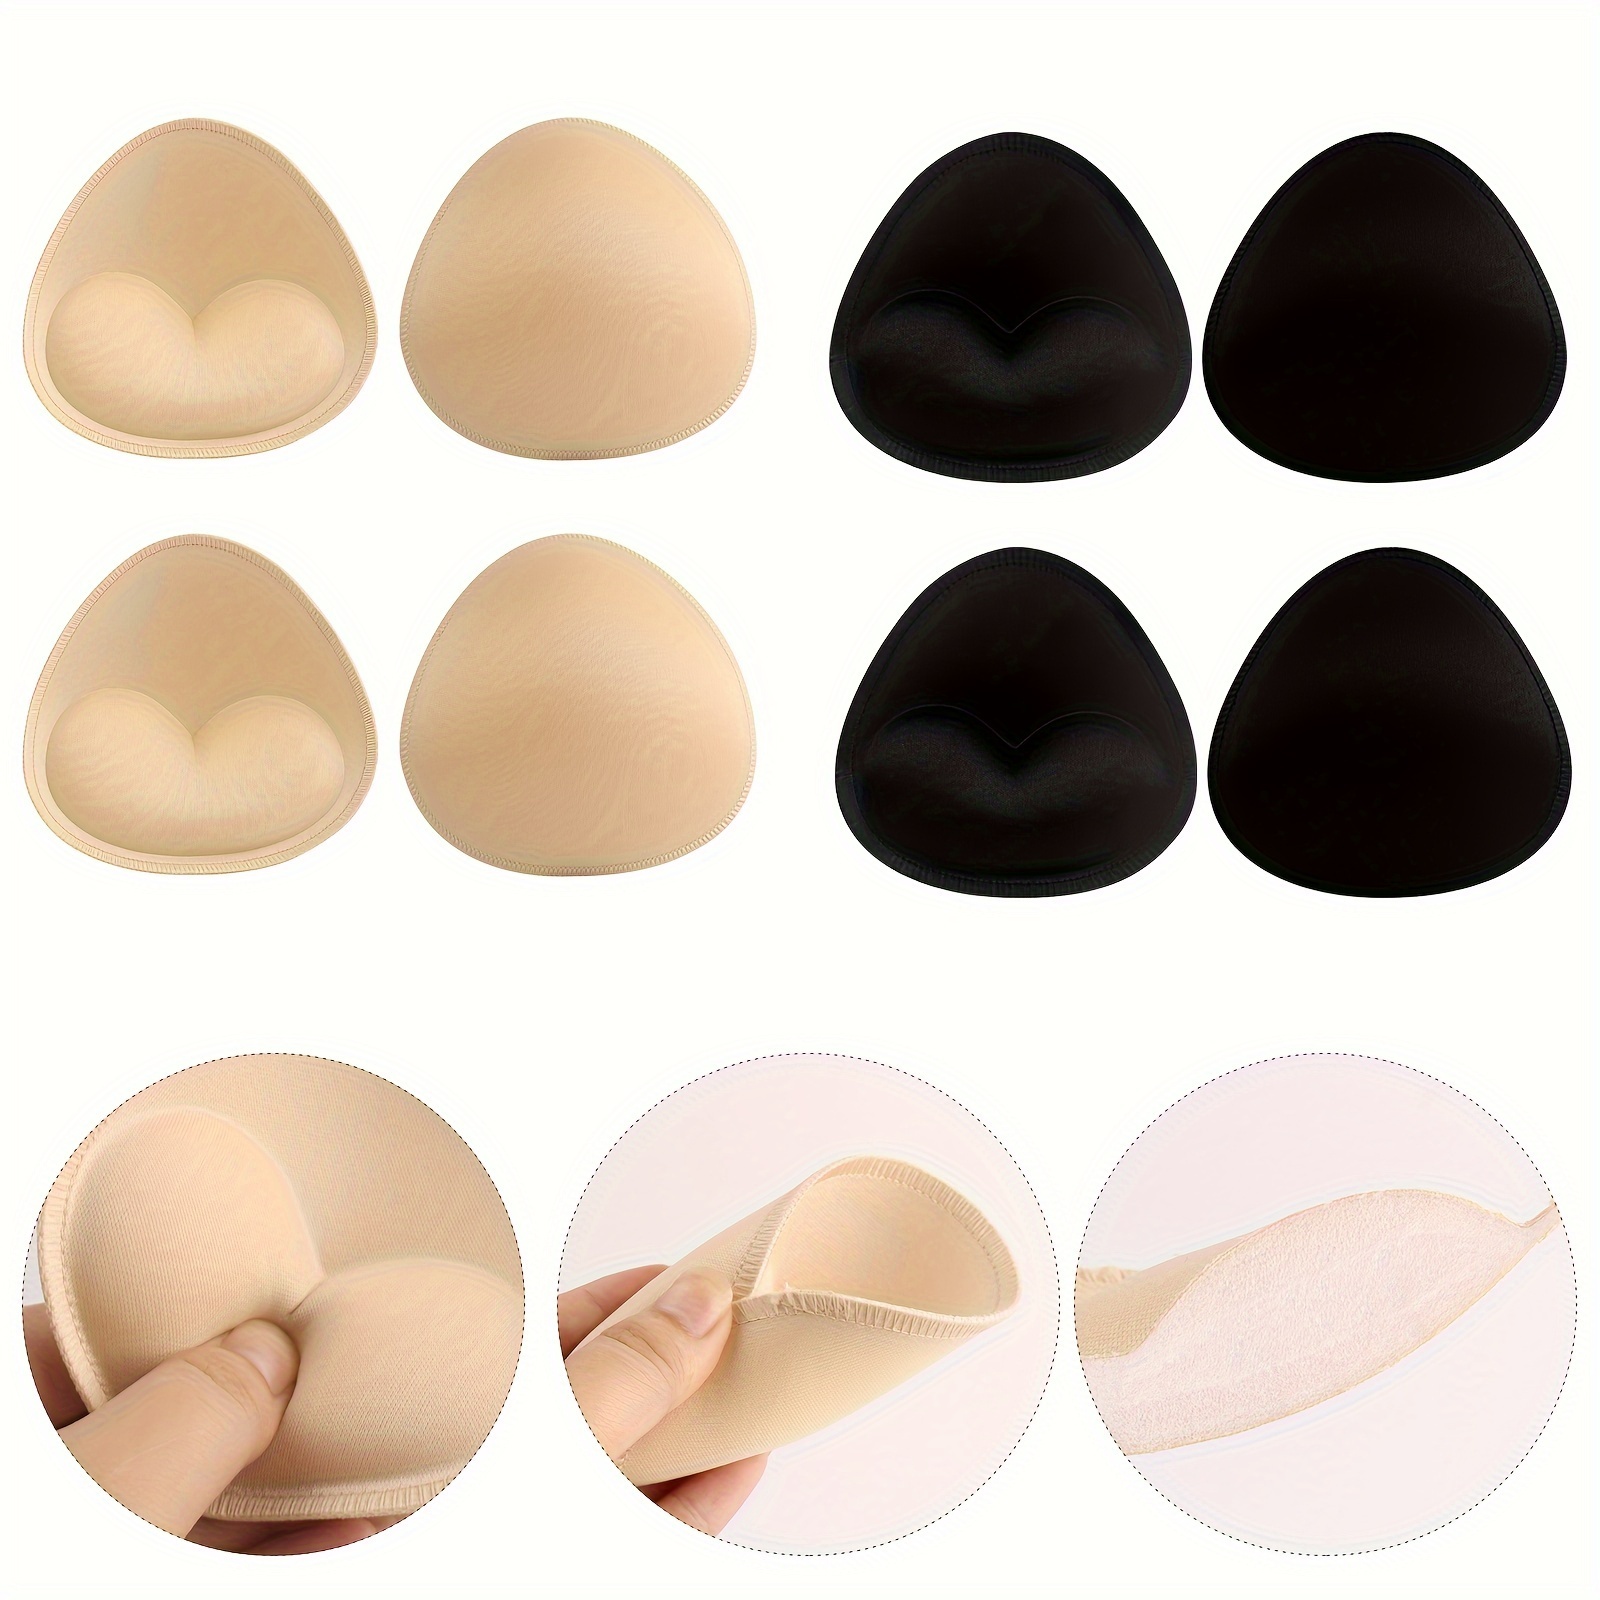  4 Pairs Triangular Chest Pad Insert Pads Breast Forms